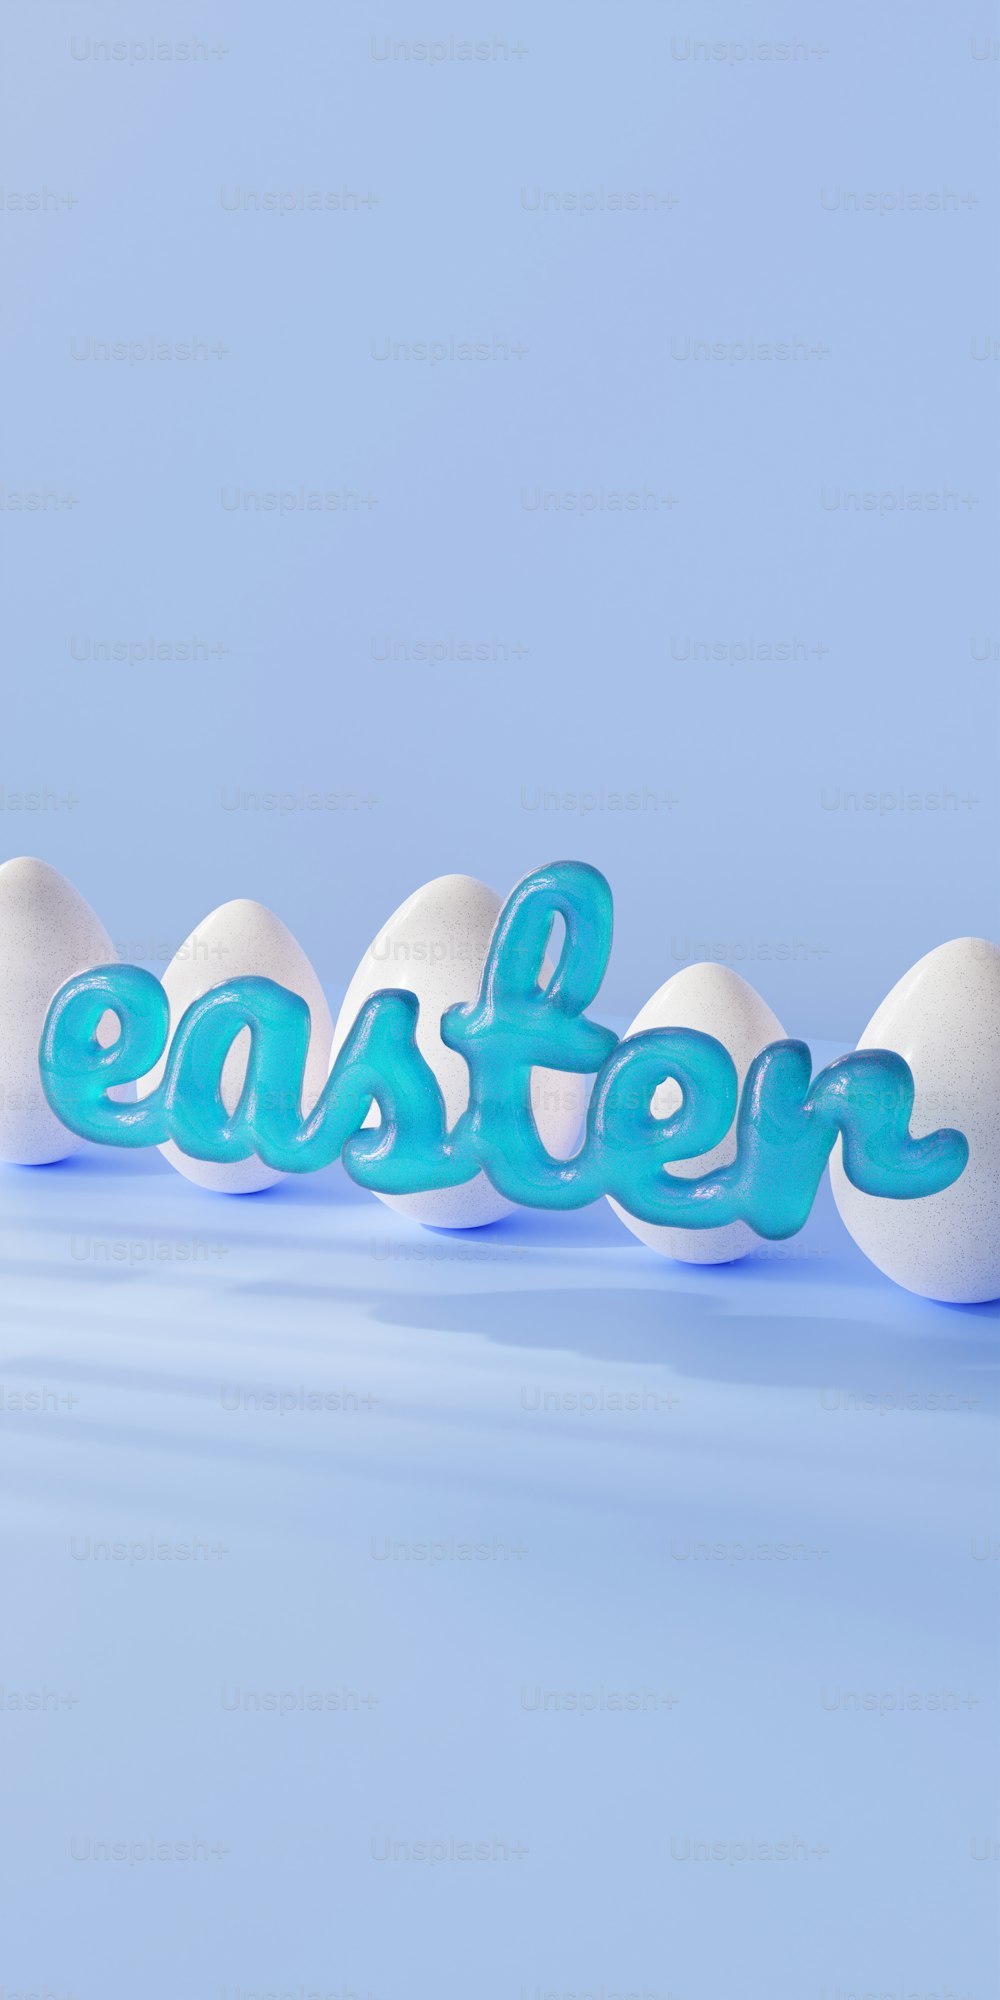 a group of eggs with the word easter spelled out of them